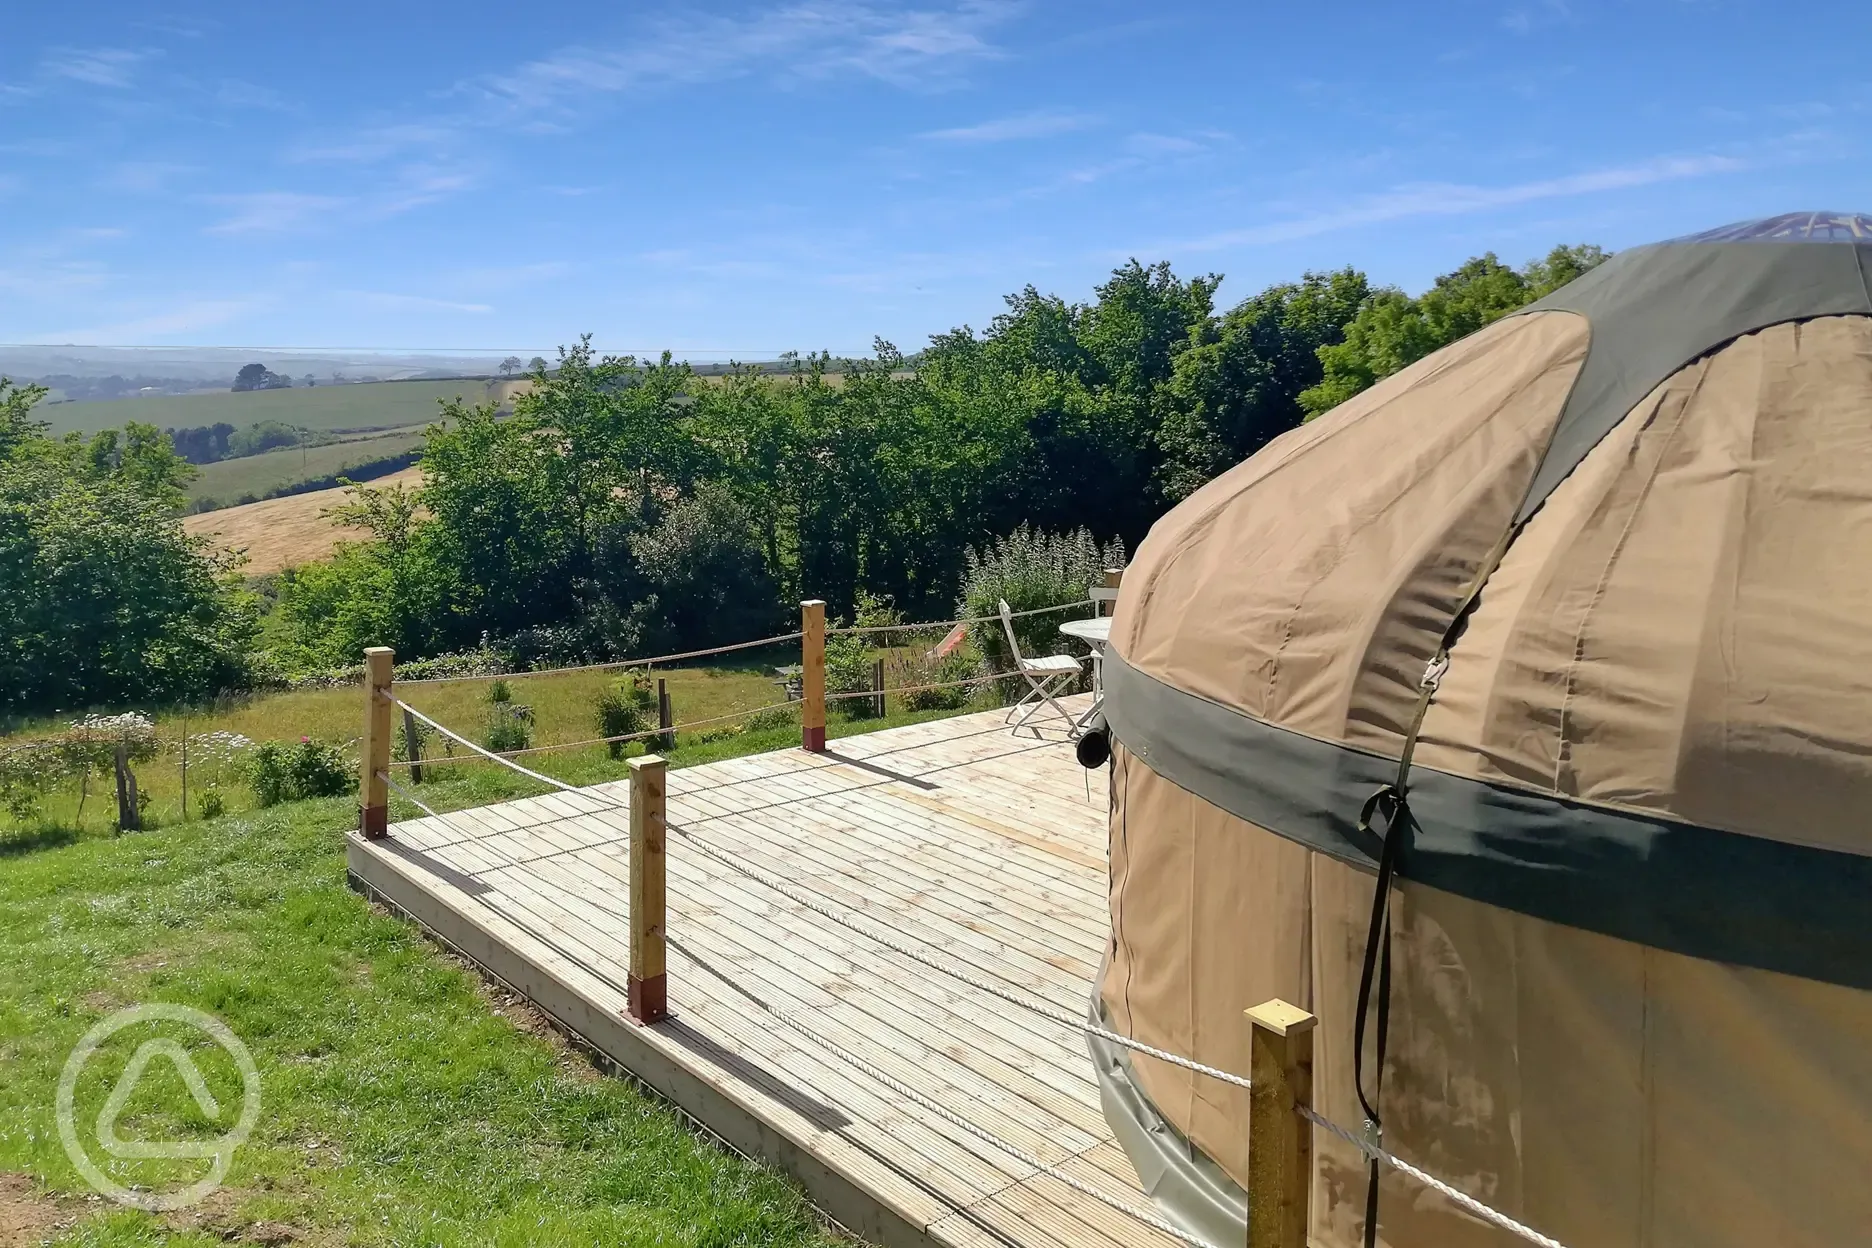 Countryside views from the yurt